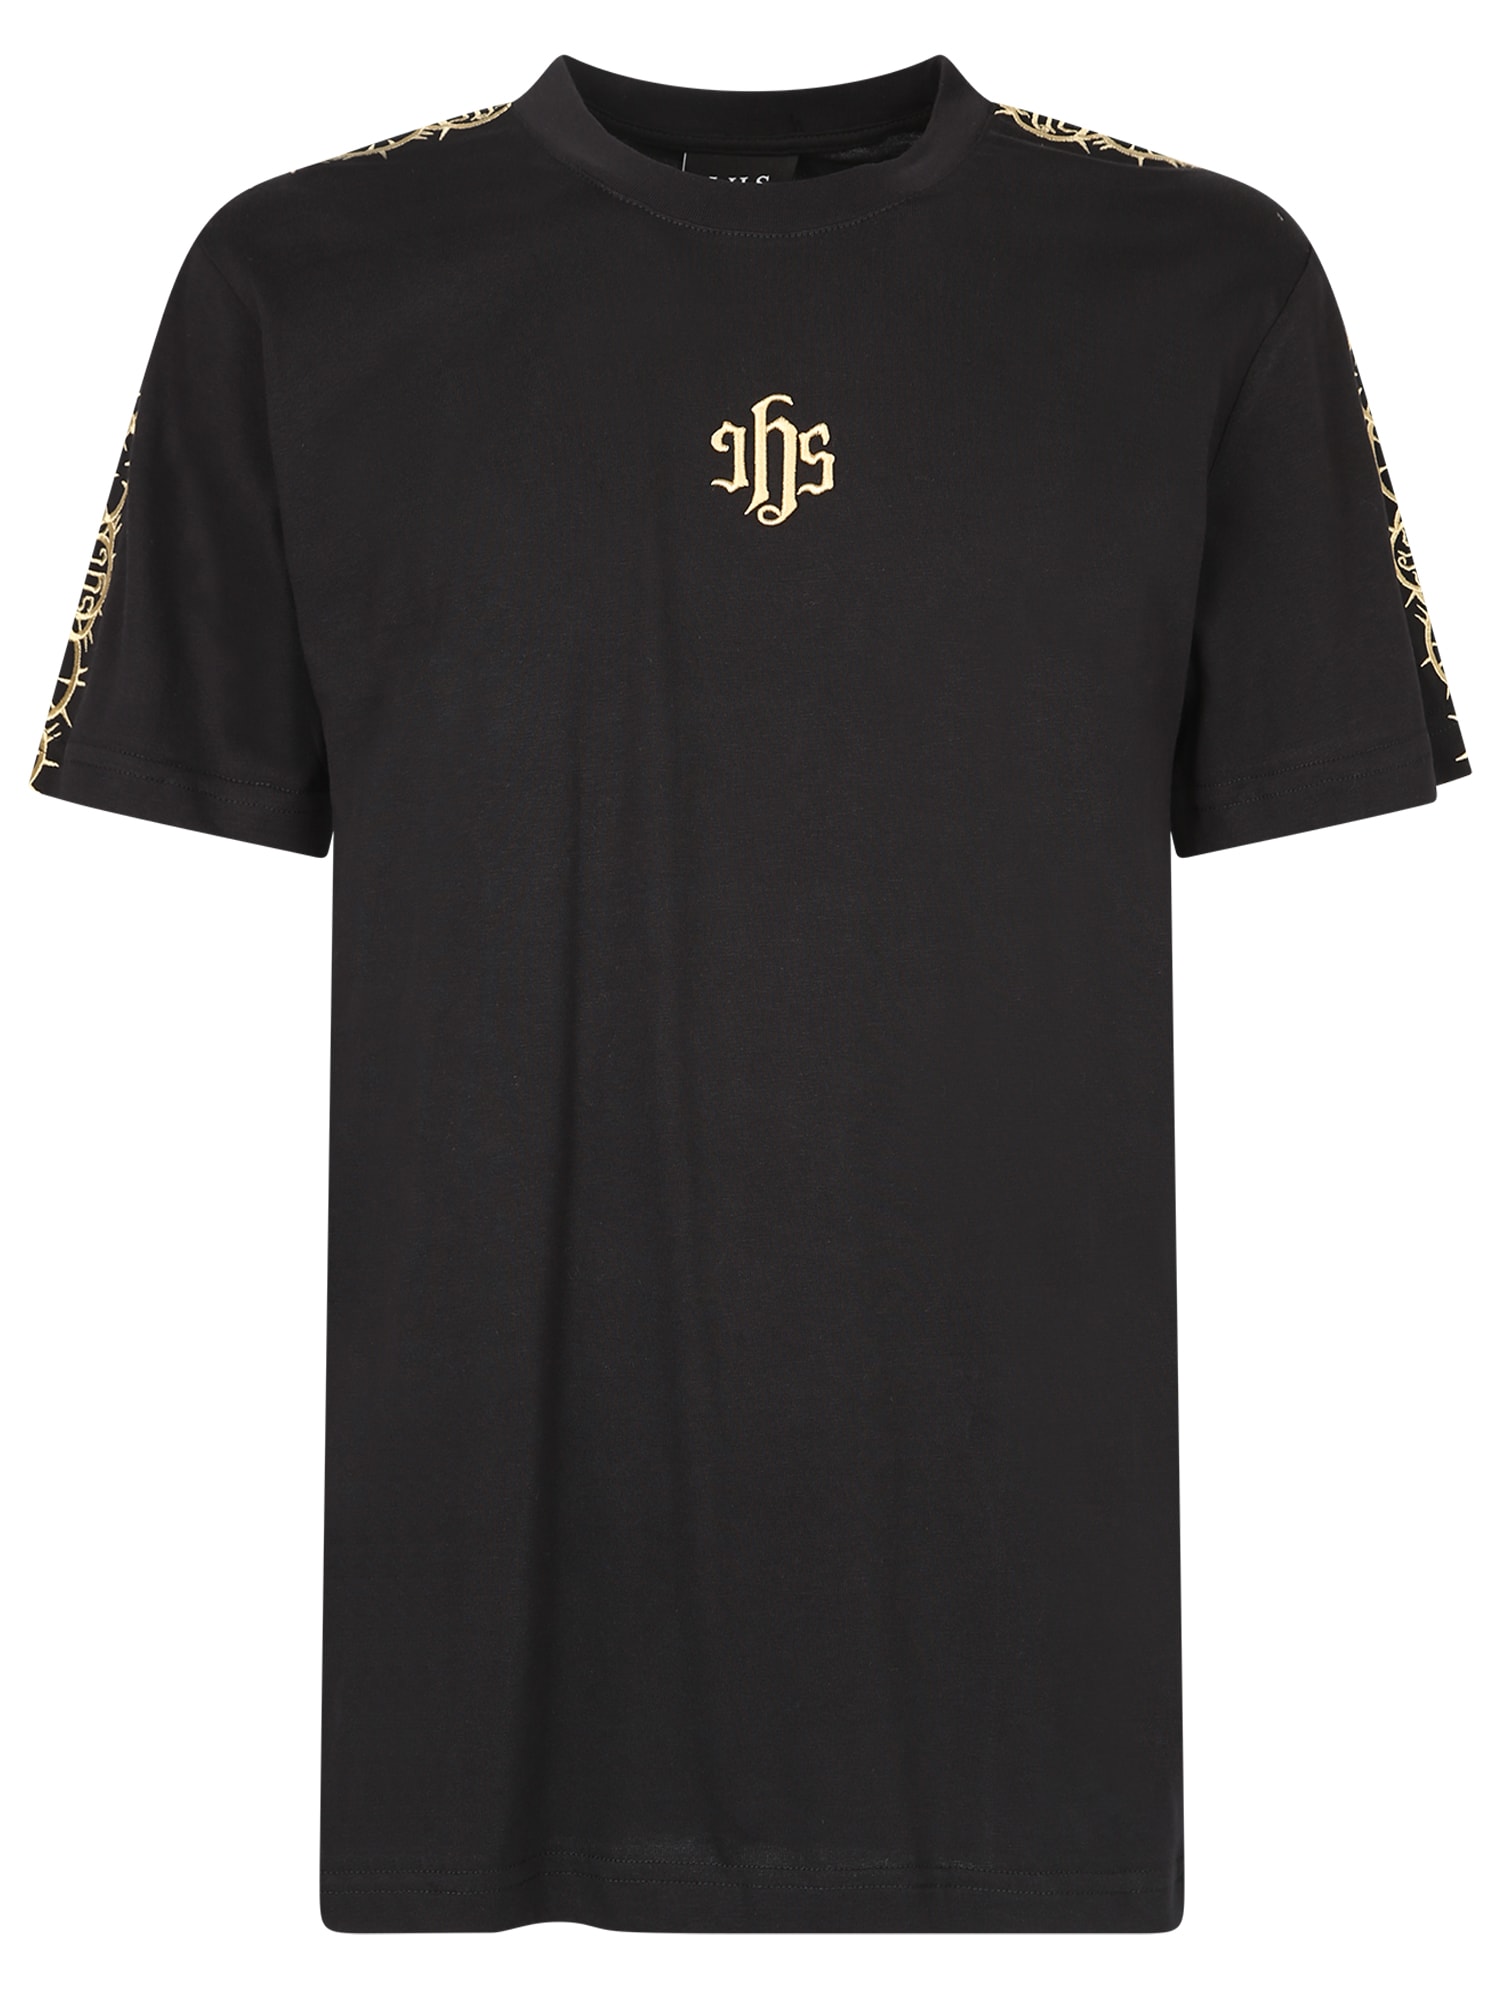 Ihs Branded T-shirt